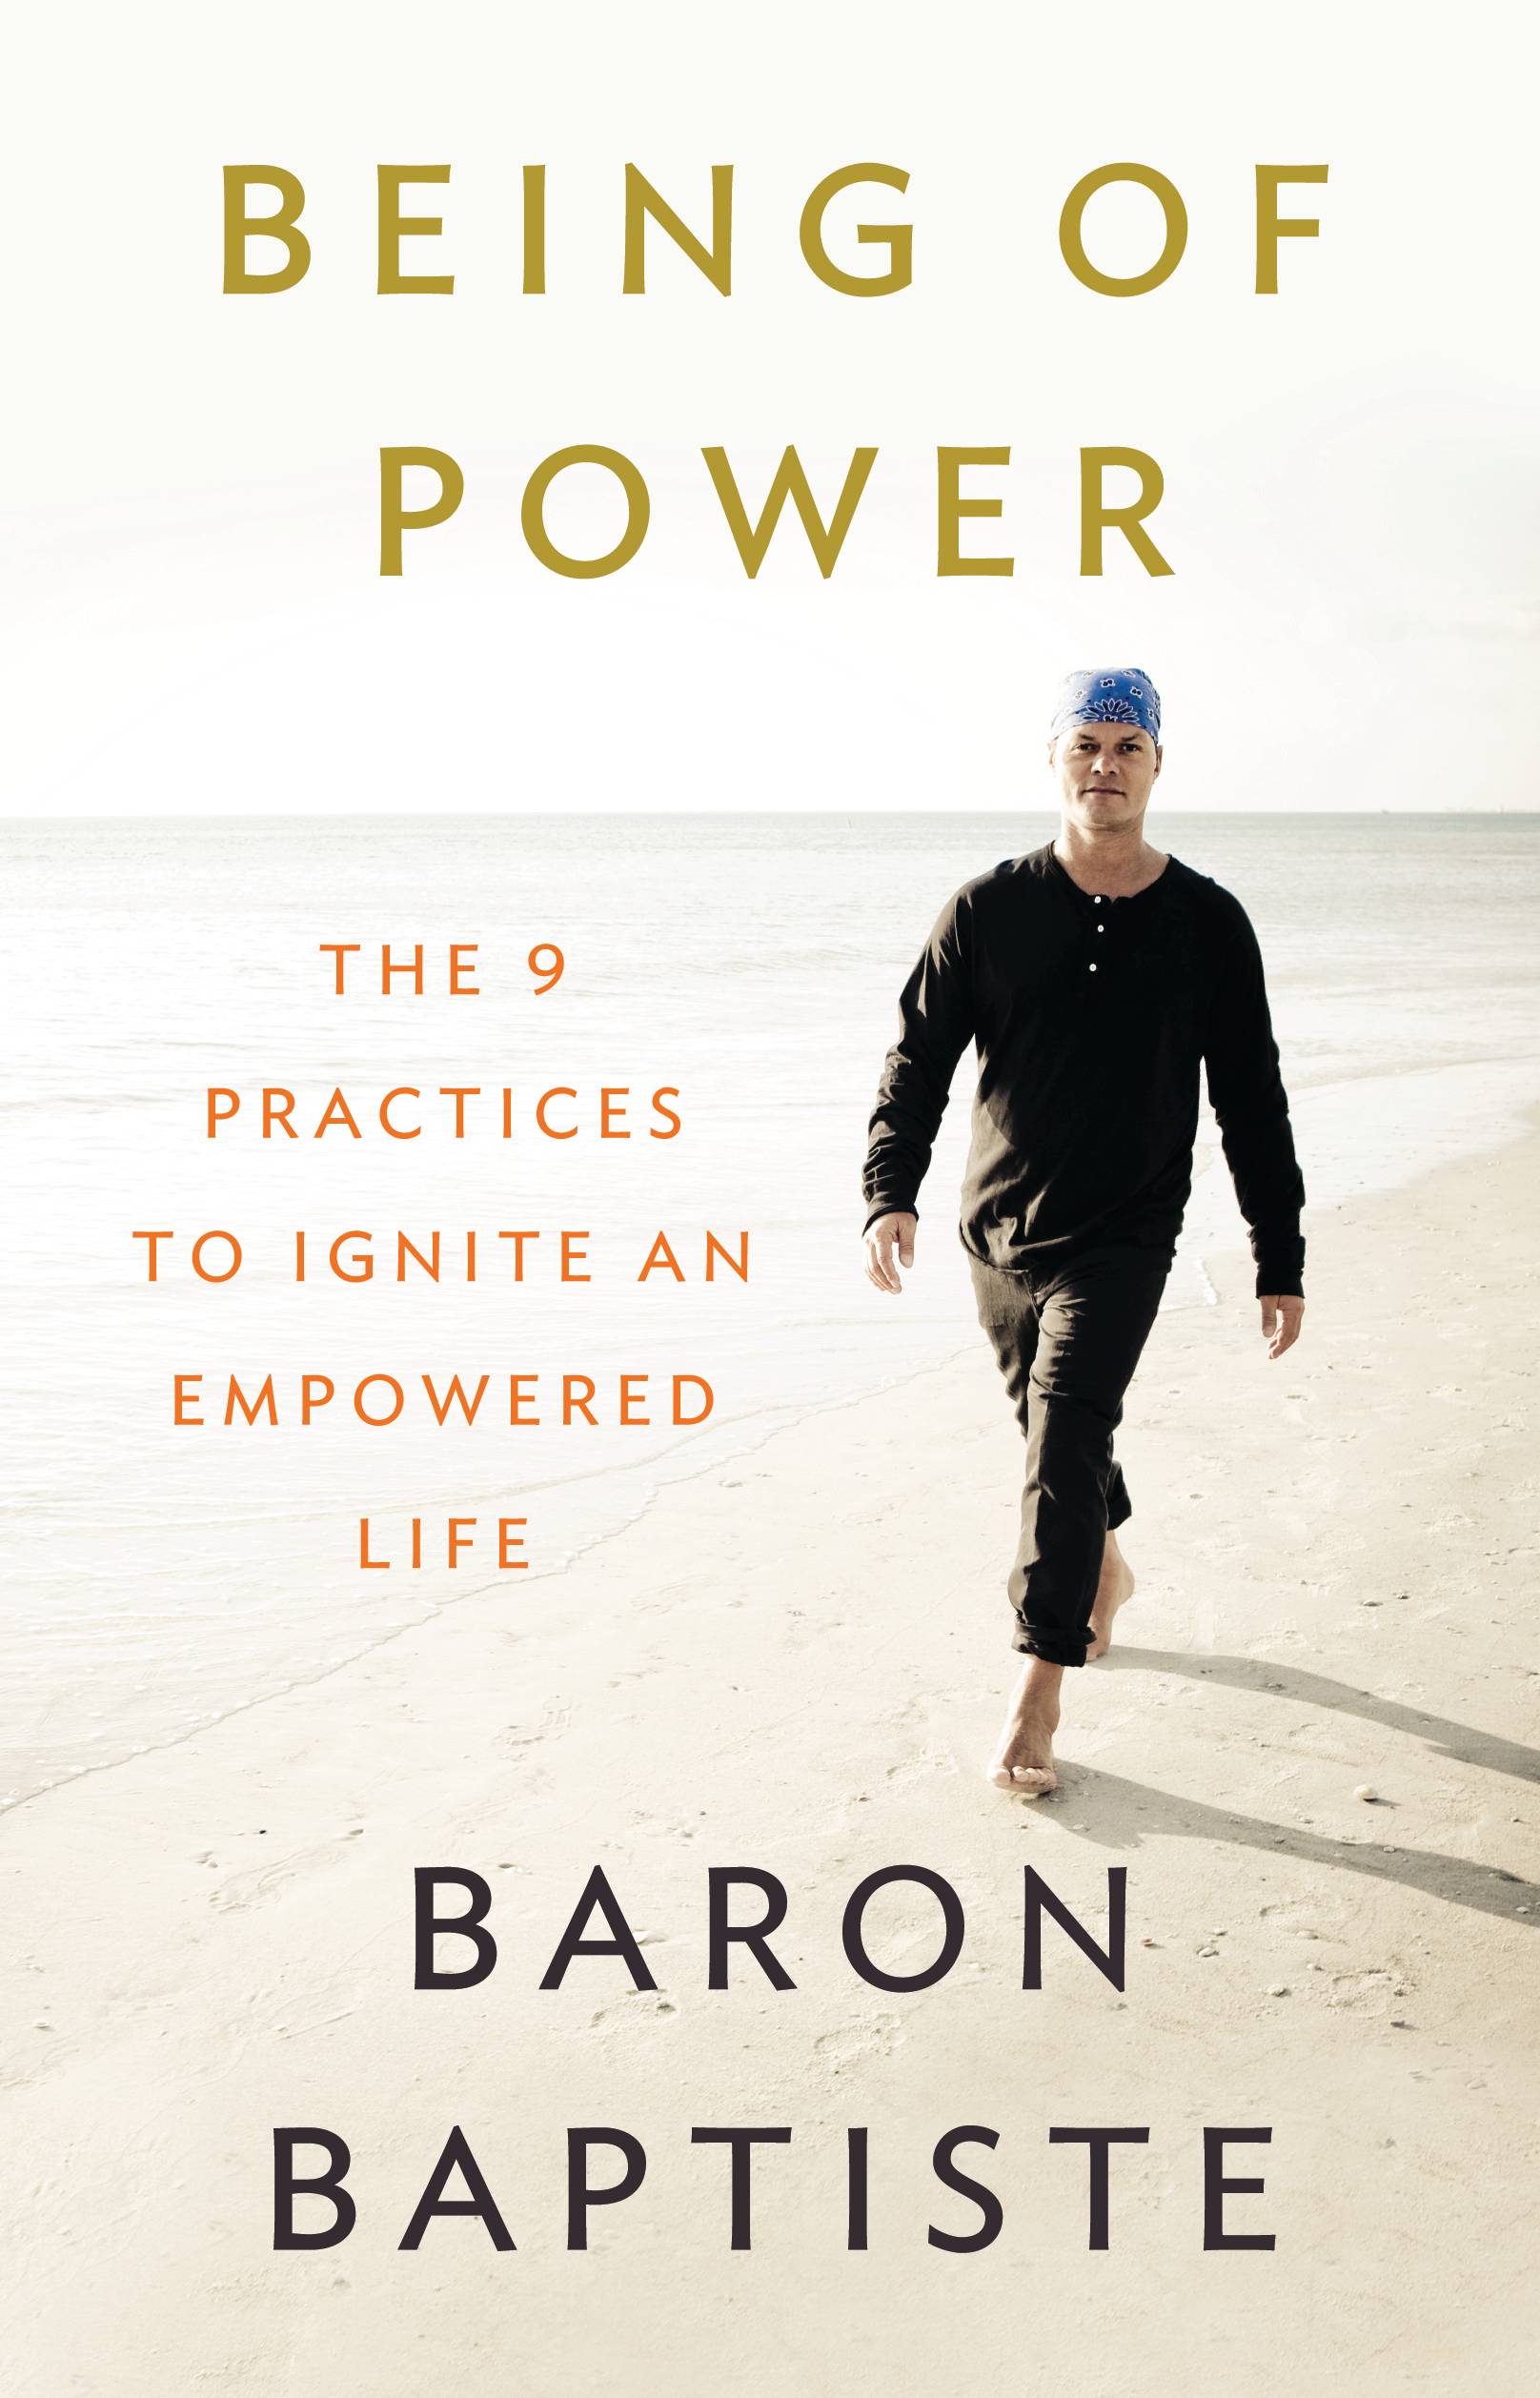 Being of power - the 9 practices to ignite an empowered life